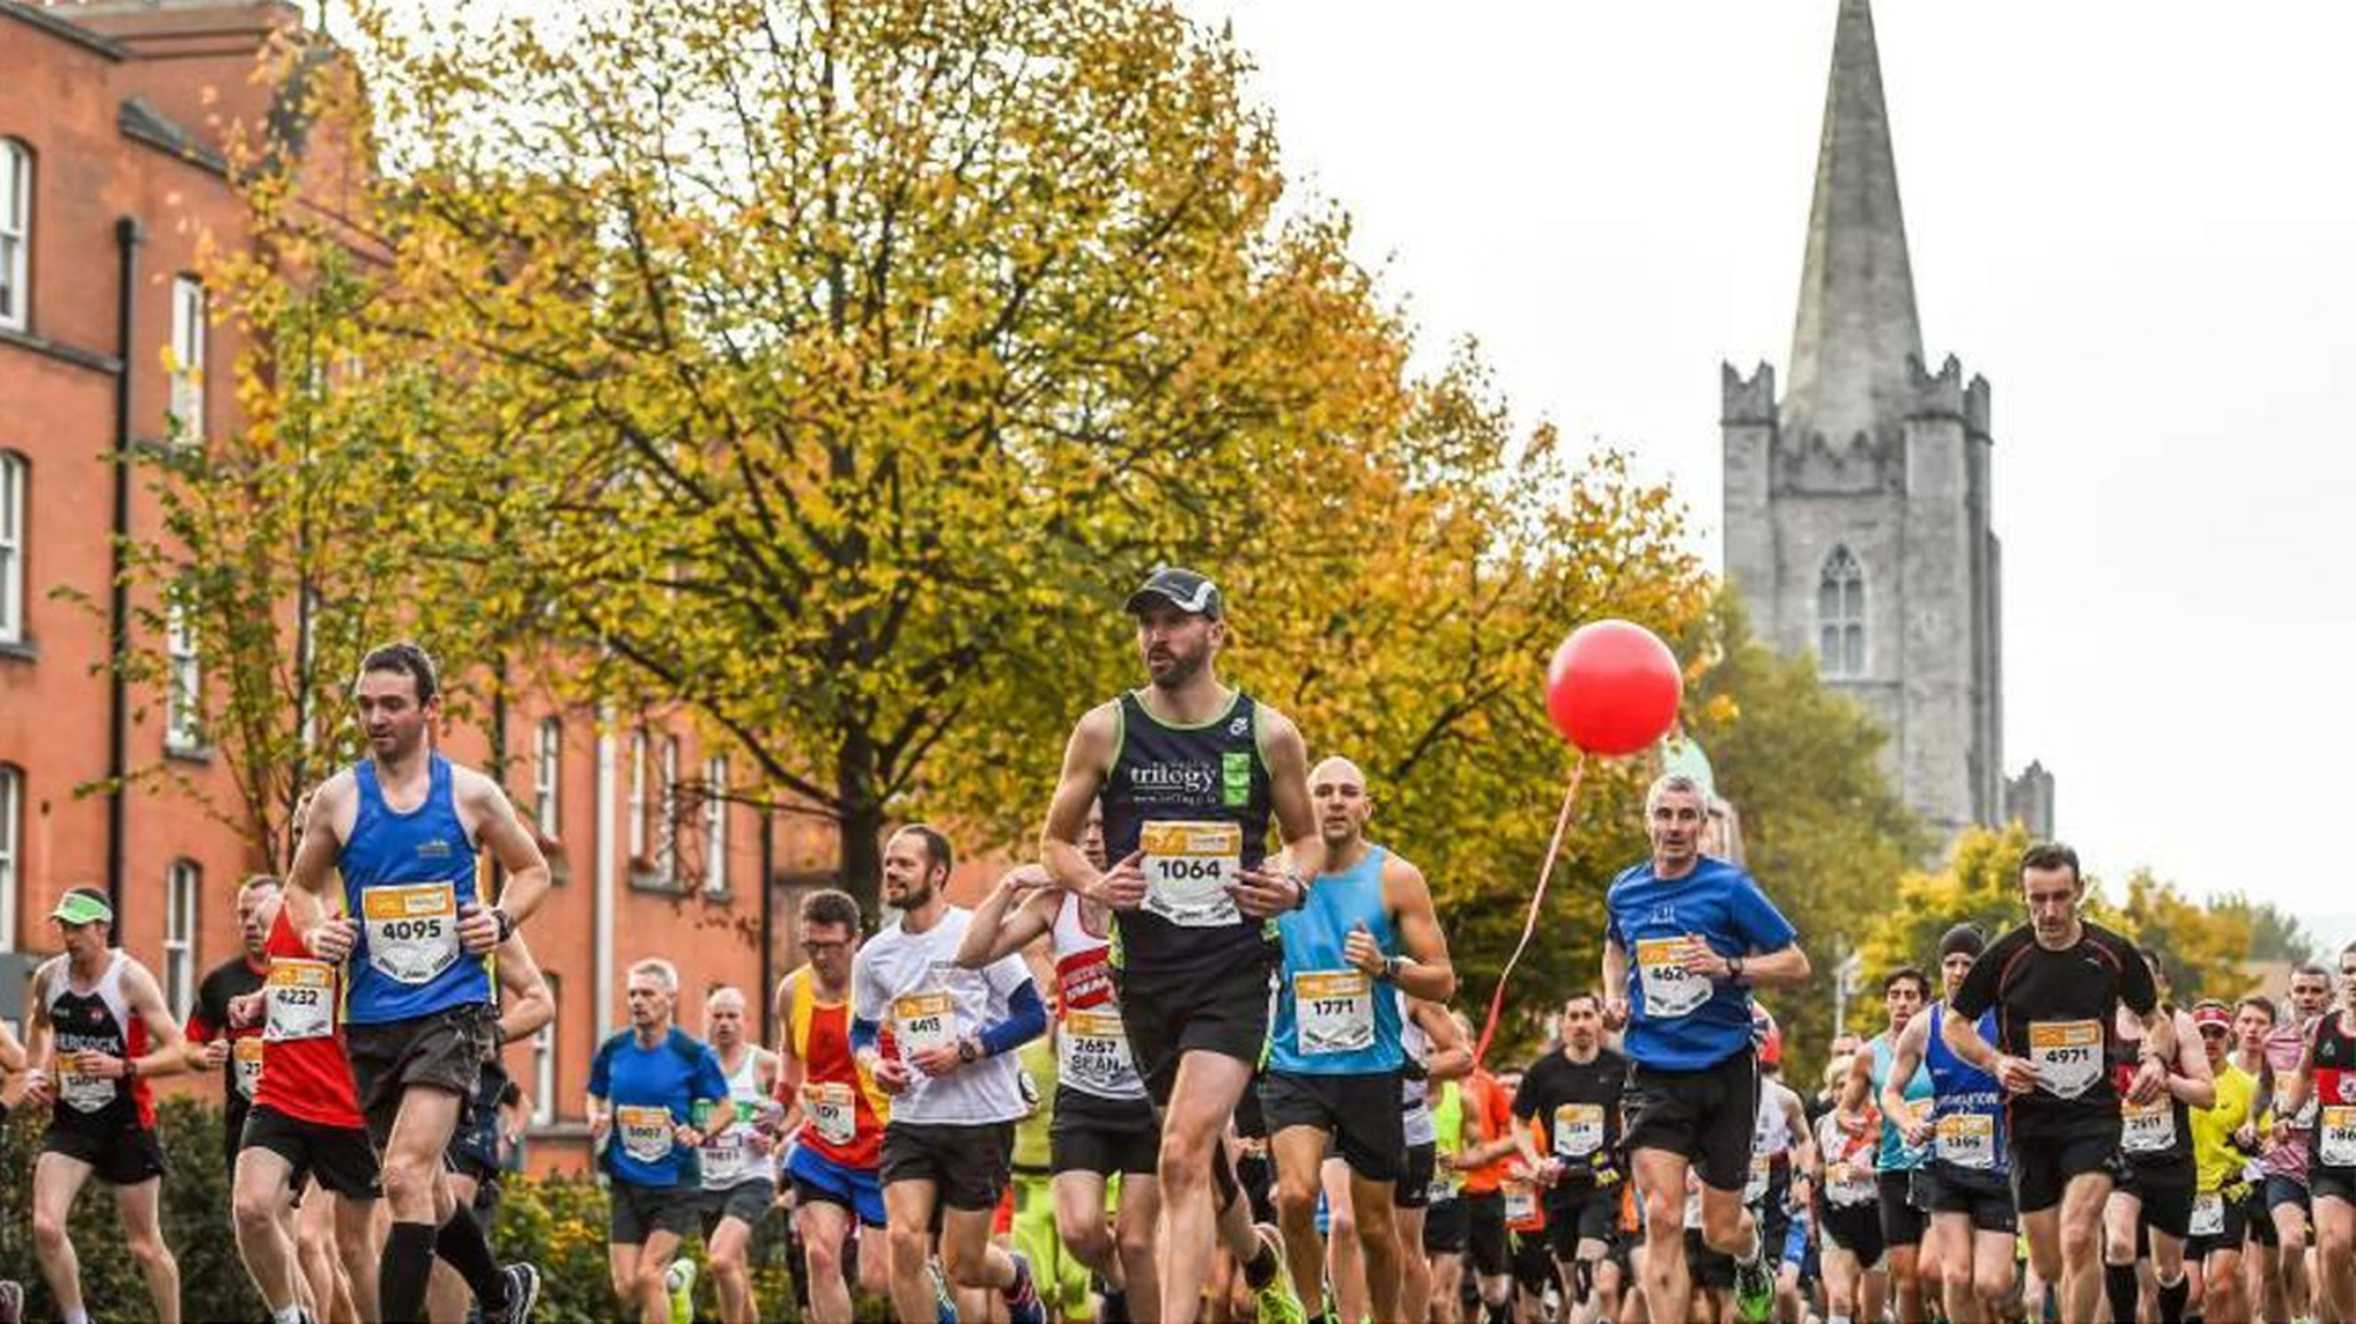 A group of Dublin Marathon runners, one carrying a red balloon, making their way through up a tree-lined street with a church steeple in the background.